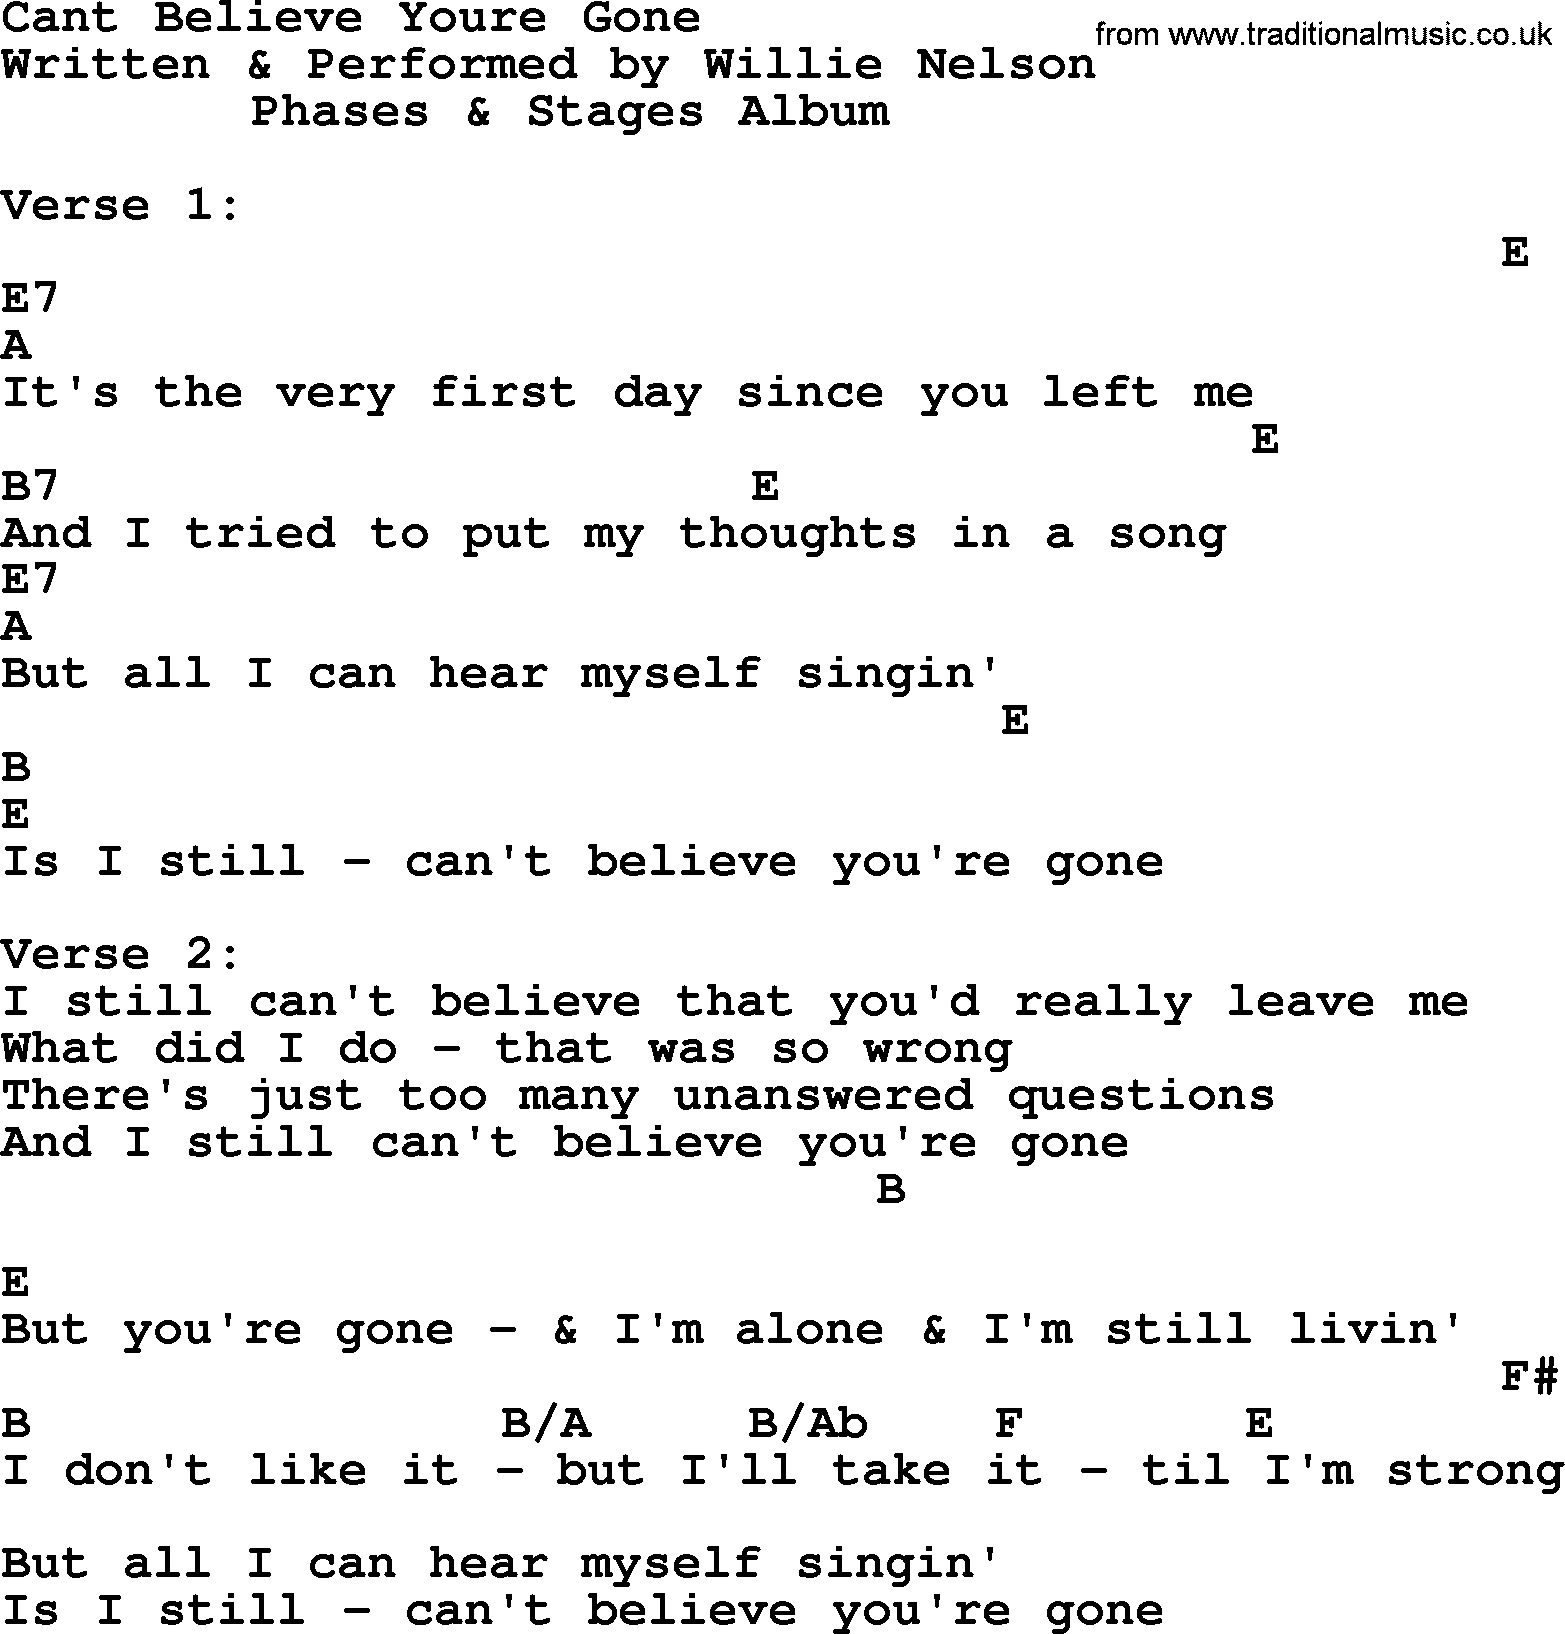 Willie Nelson song: Cant Believe Youre Gone, lyrics and chords